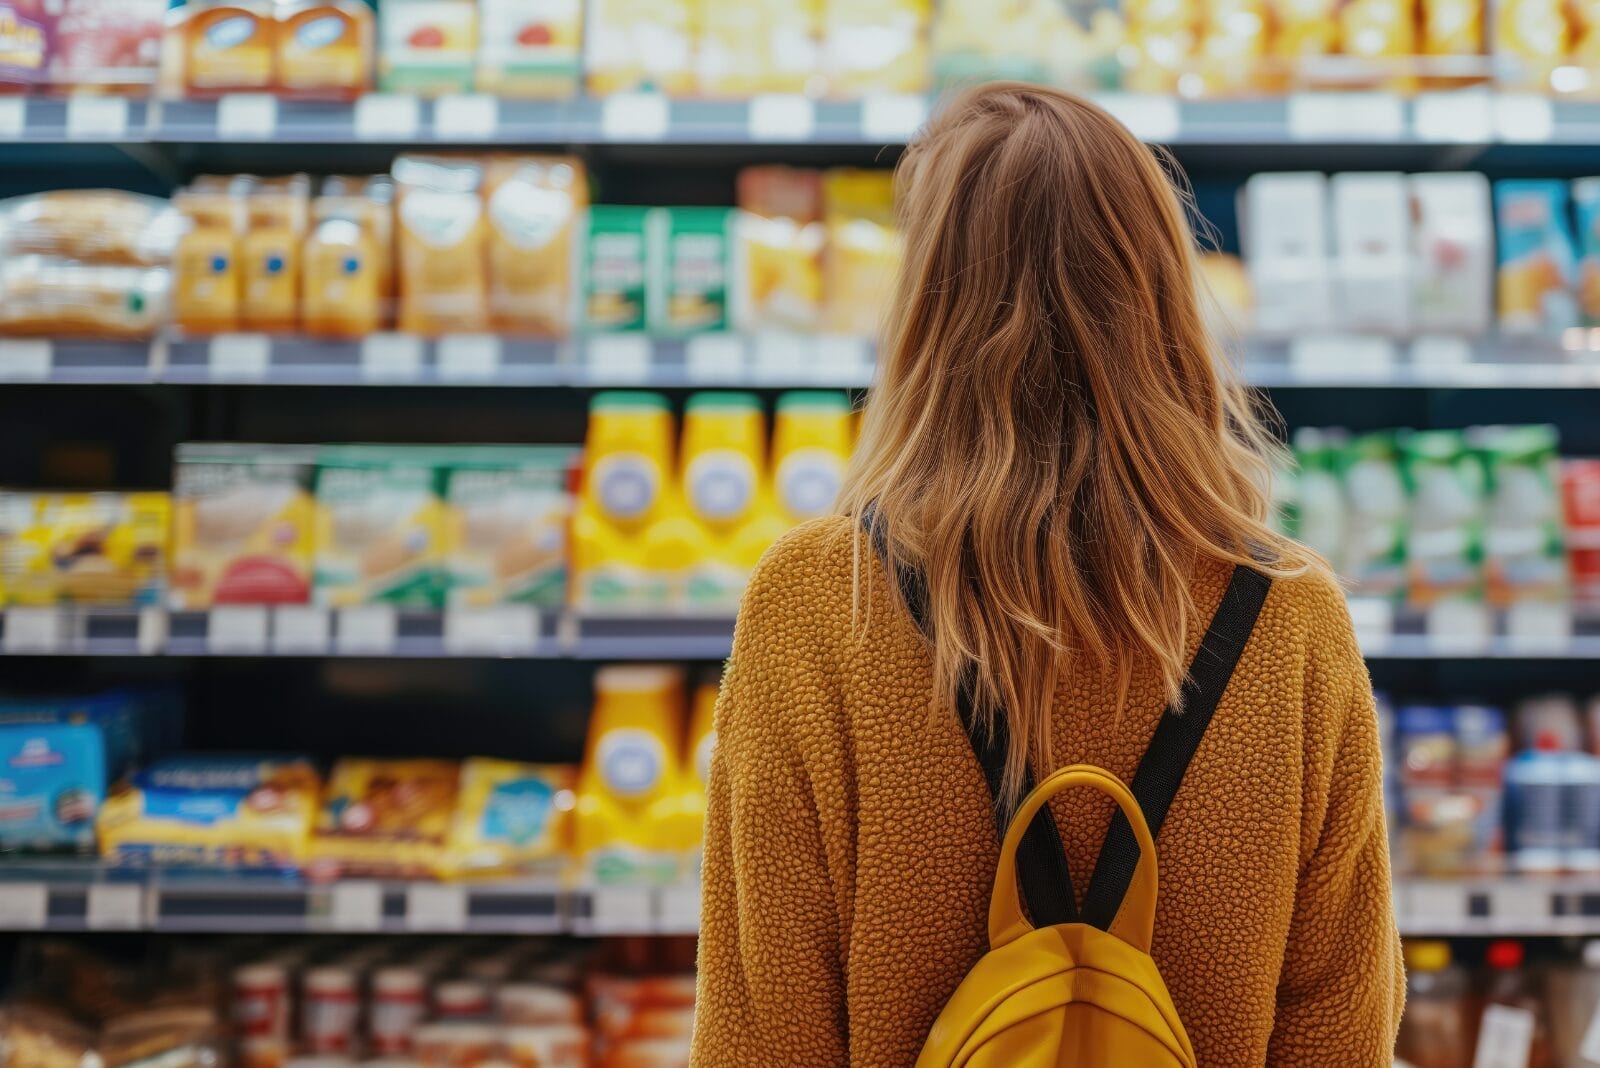 Woman shopper stands facing grocery store aisle